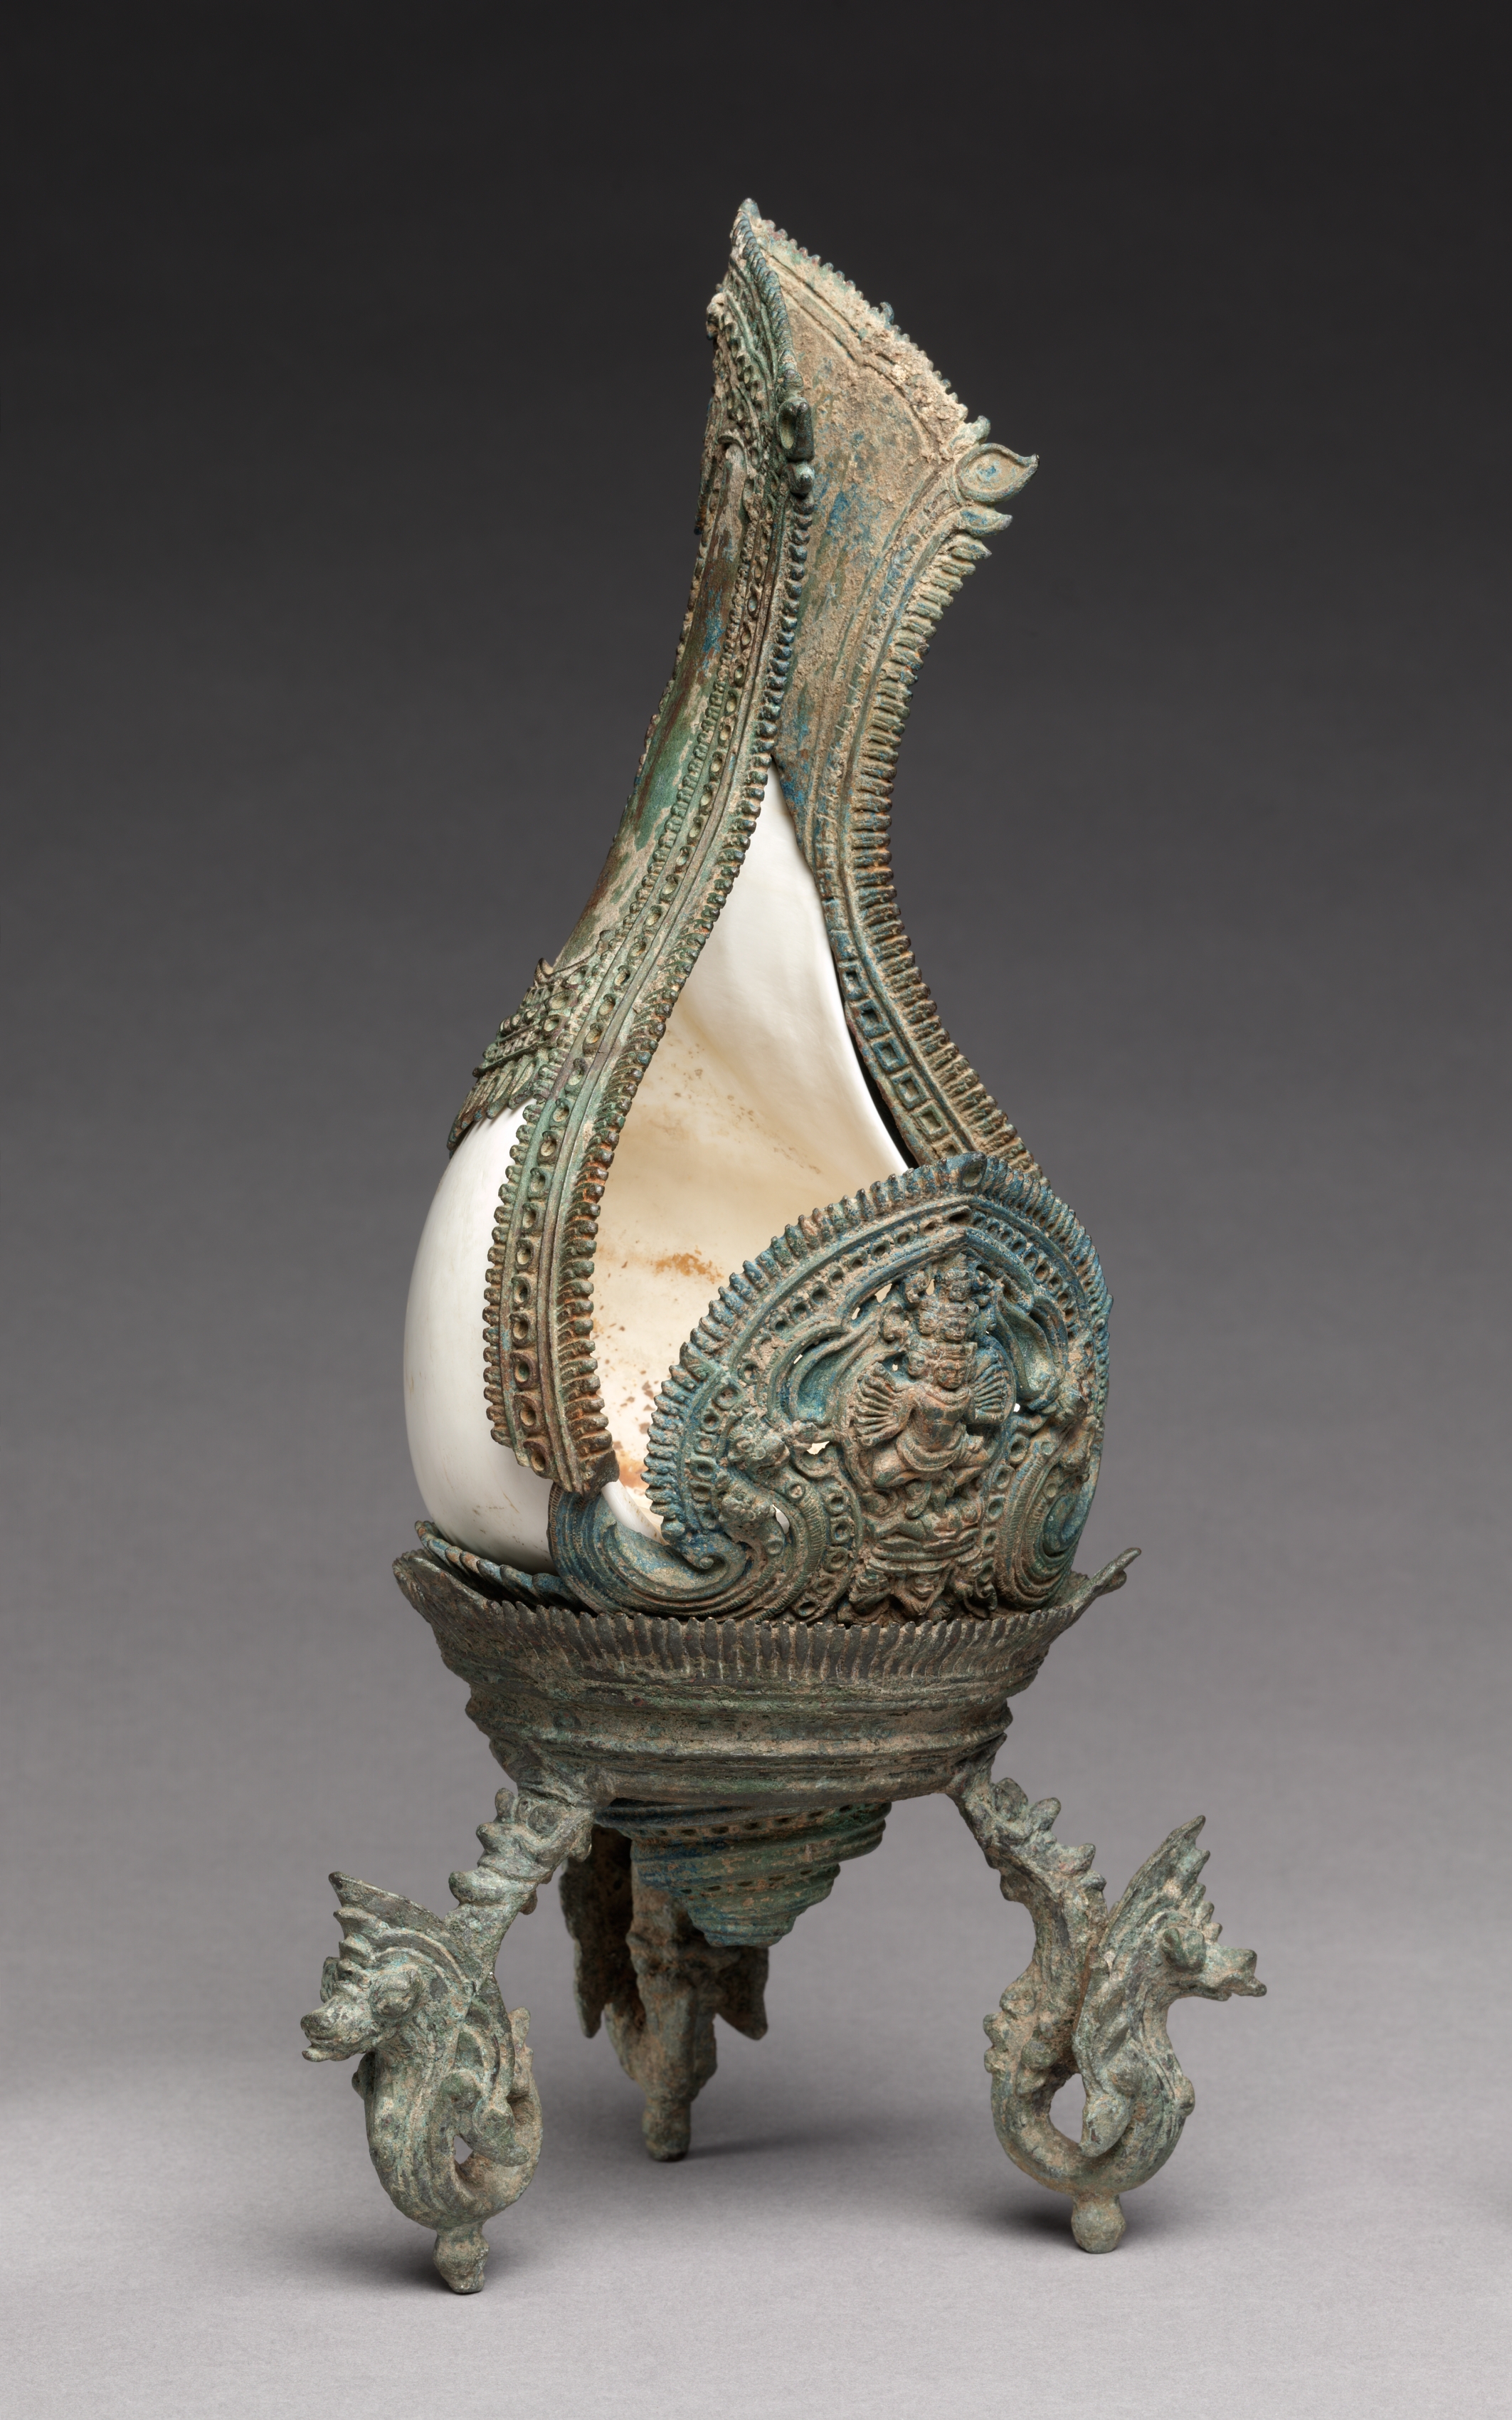 Conch Shell with a Figure of Hevajra